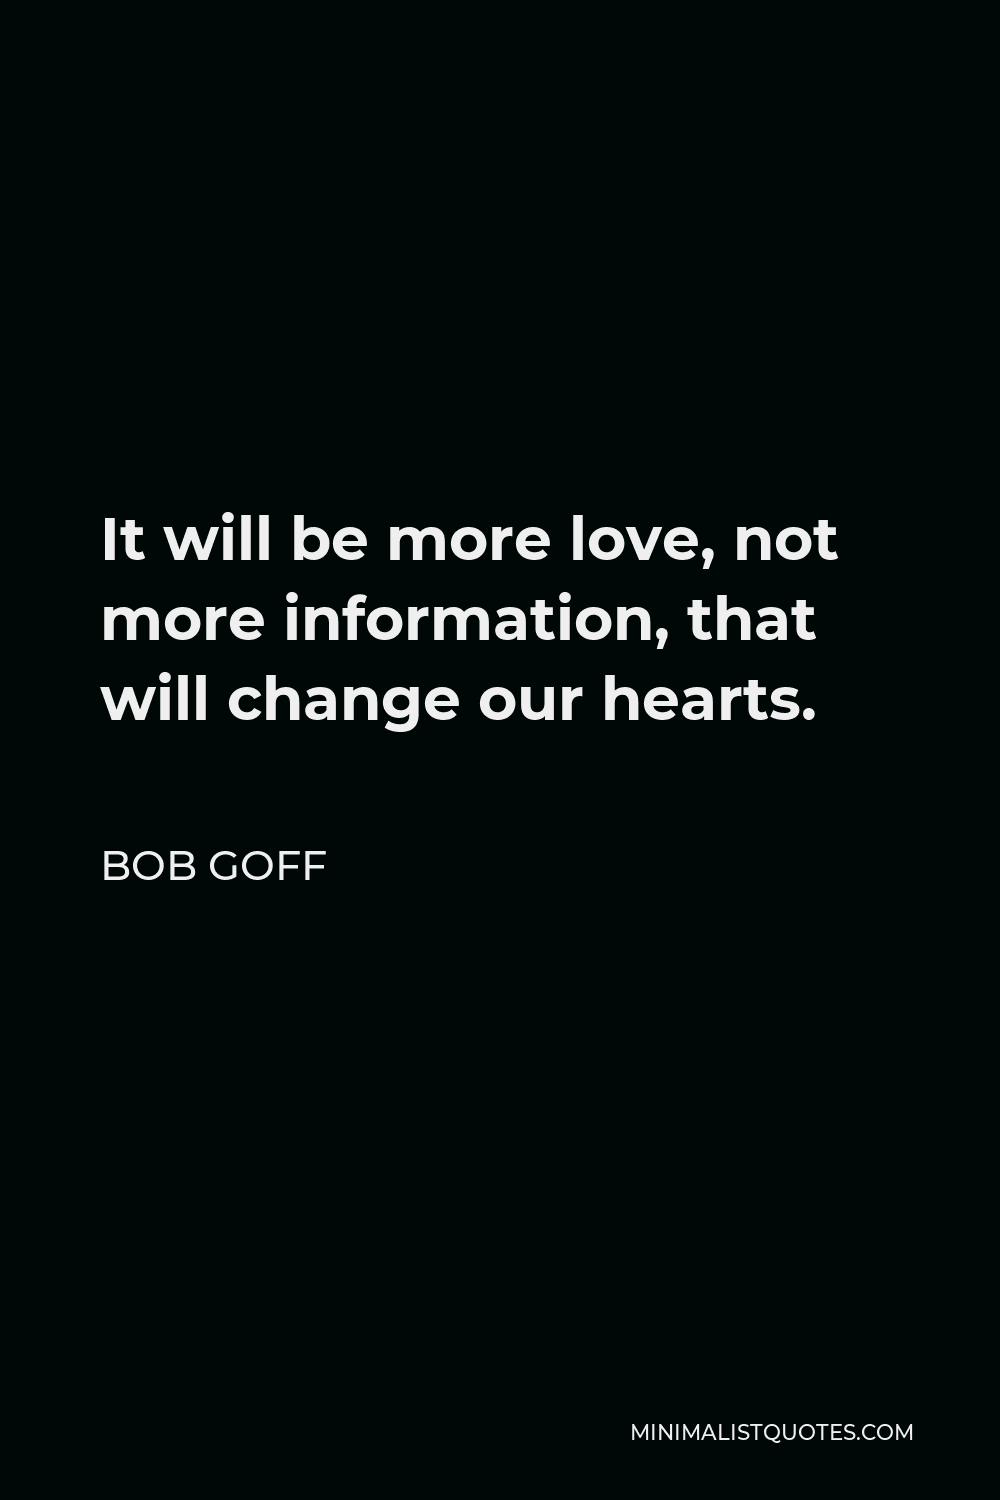 Bob Goff Quote - It will be more love, not more information, that will change our hearts.